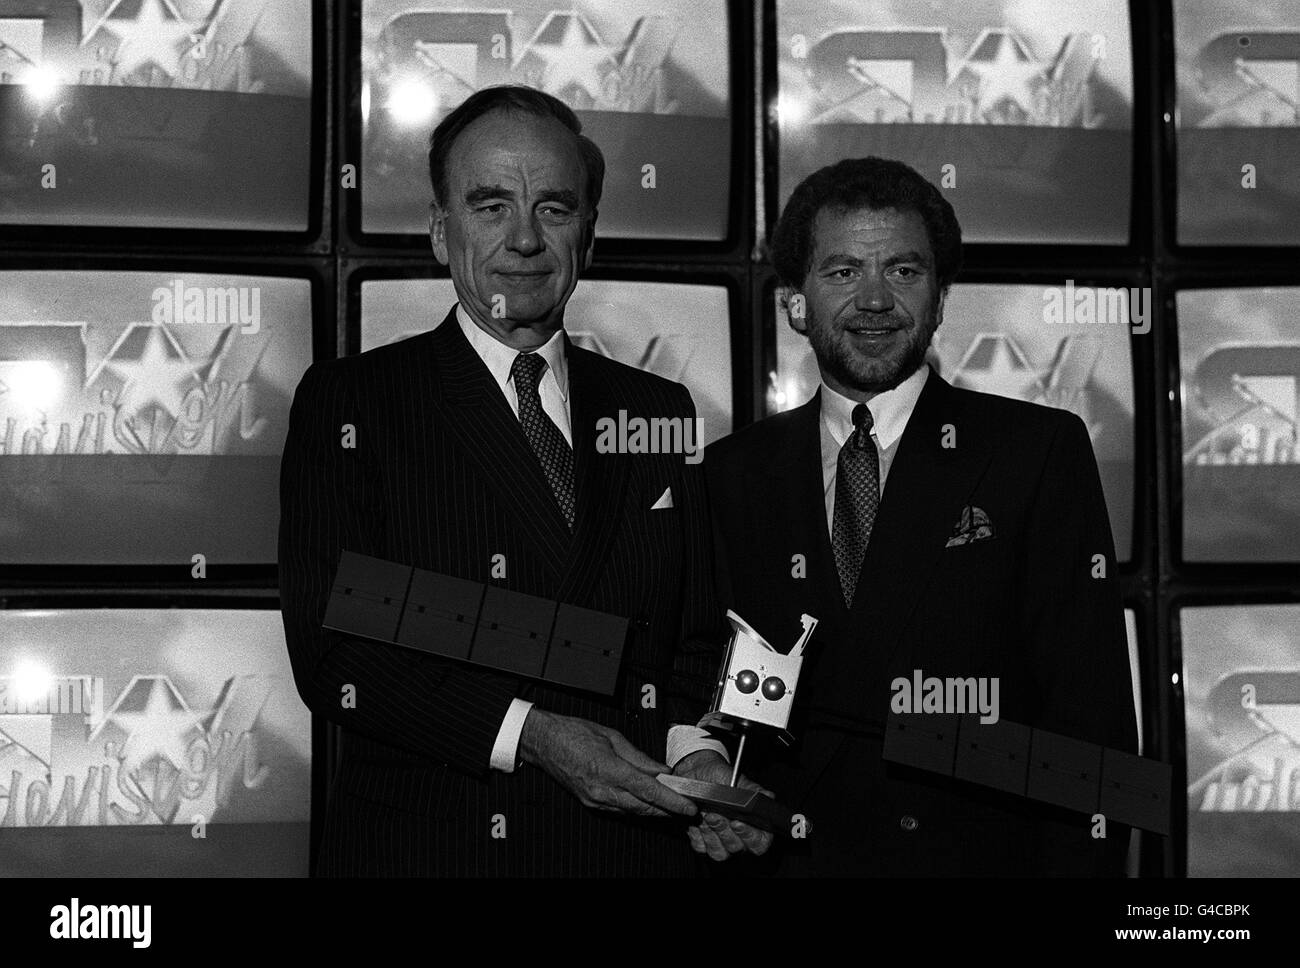 PA NEWS PHOTO 8/6/88 RUPERT MURDOCH AND ALAN SUGAR HOLDING A MODEL OF THE ASTRA SATELLITE AT A LONDON PRESS CONFERENCE TO ANNOUNCE THE 10 YEAR LEASE FOR THREE NEW SATELLITE CHANNELS, BY SUGAR'S AMSTRAD COMPANY Stock Photo